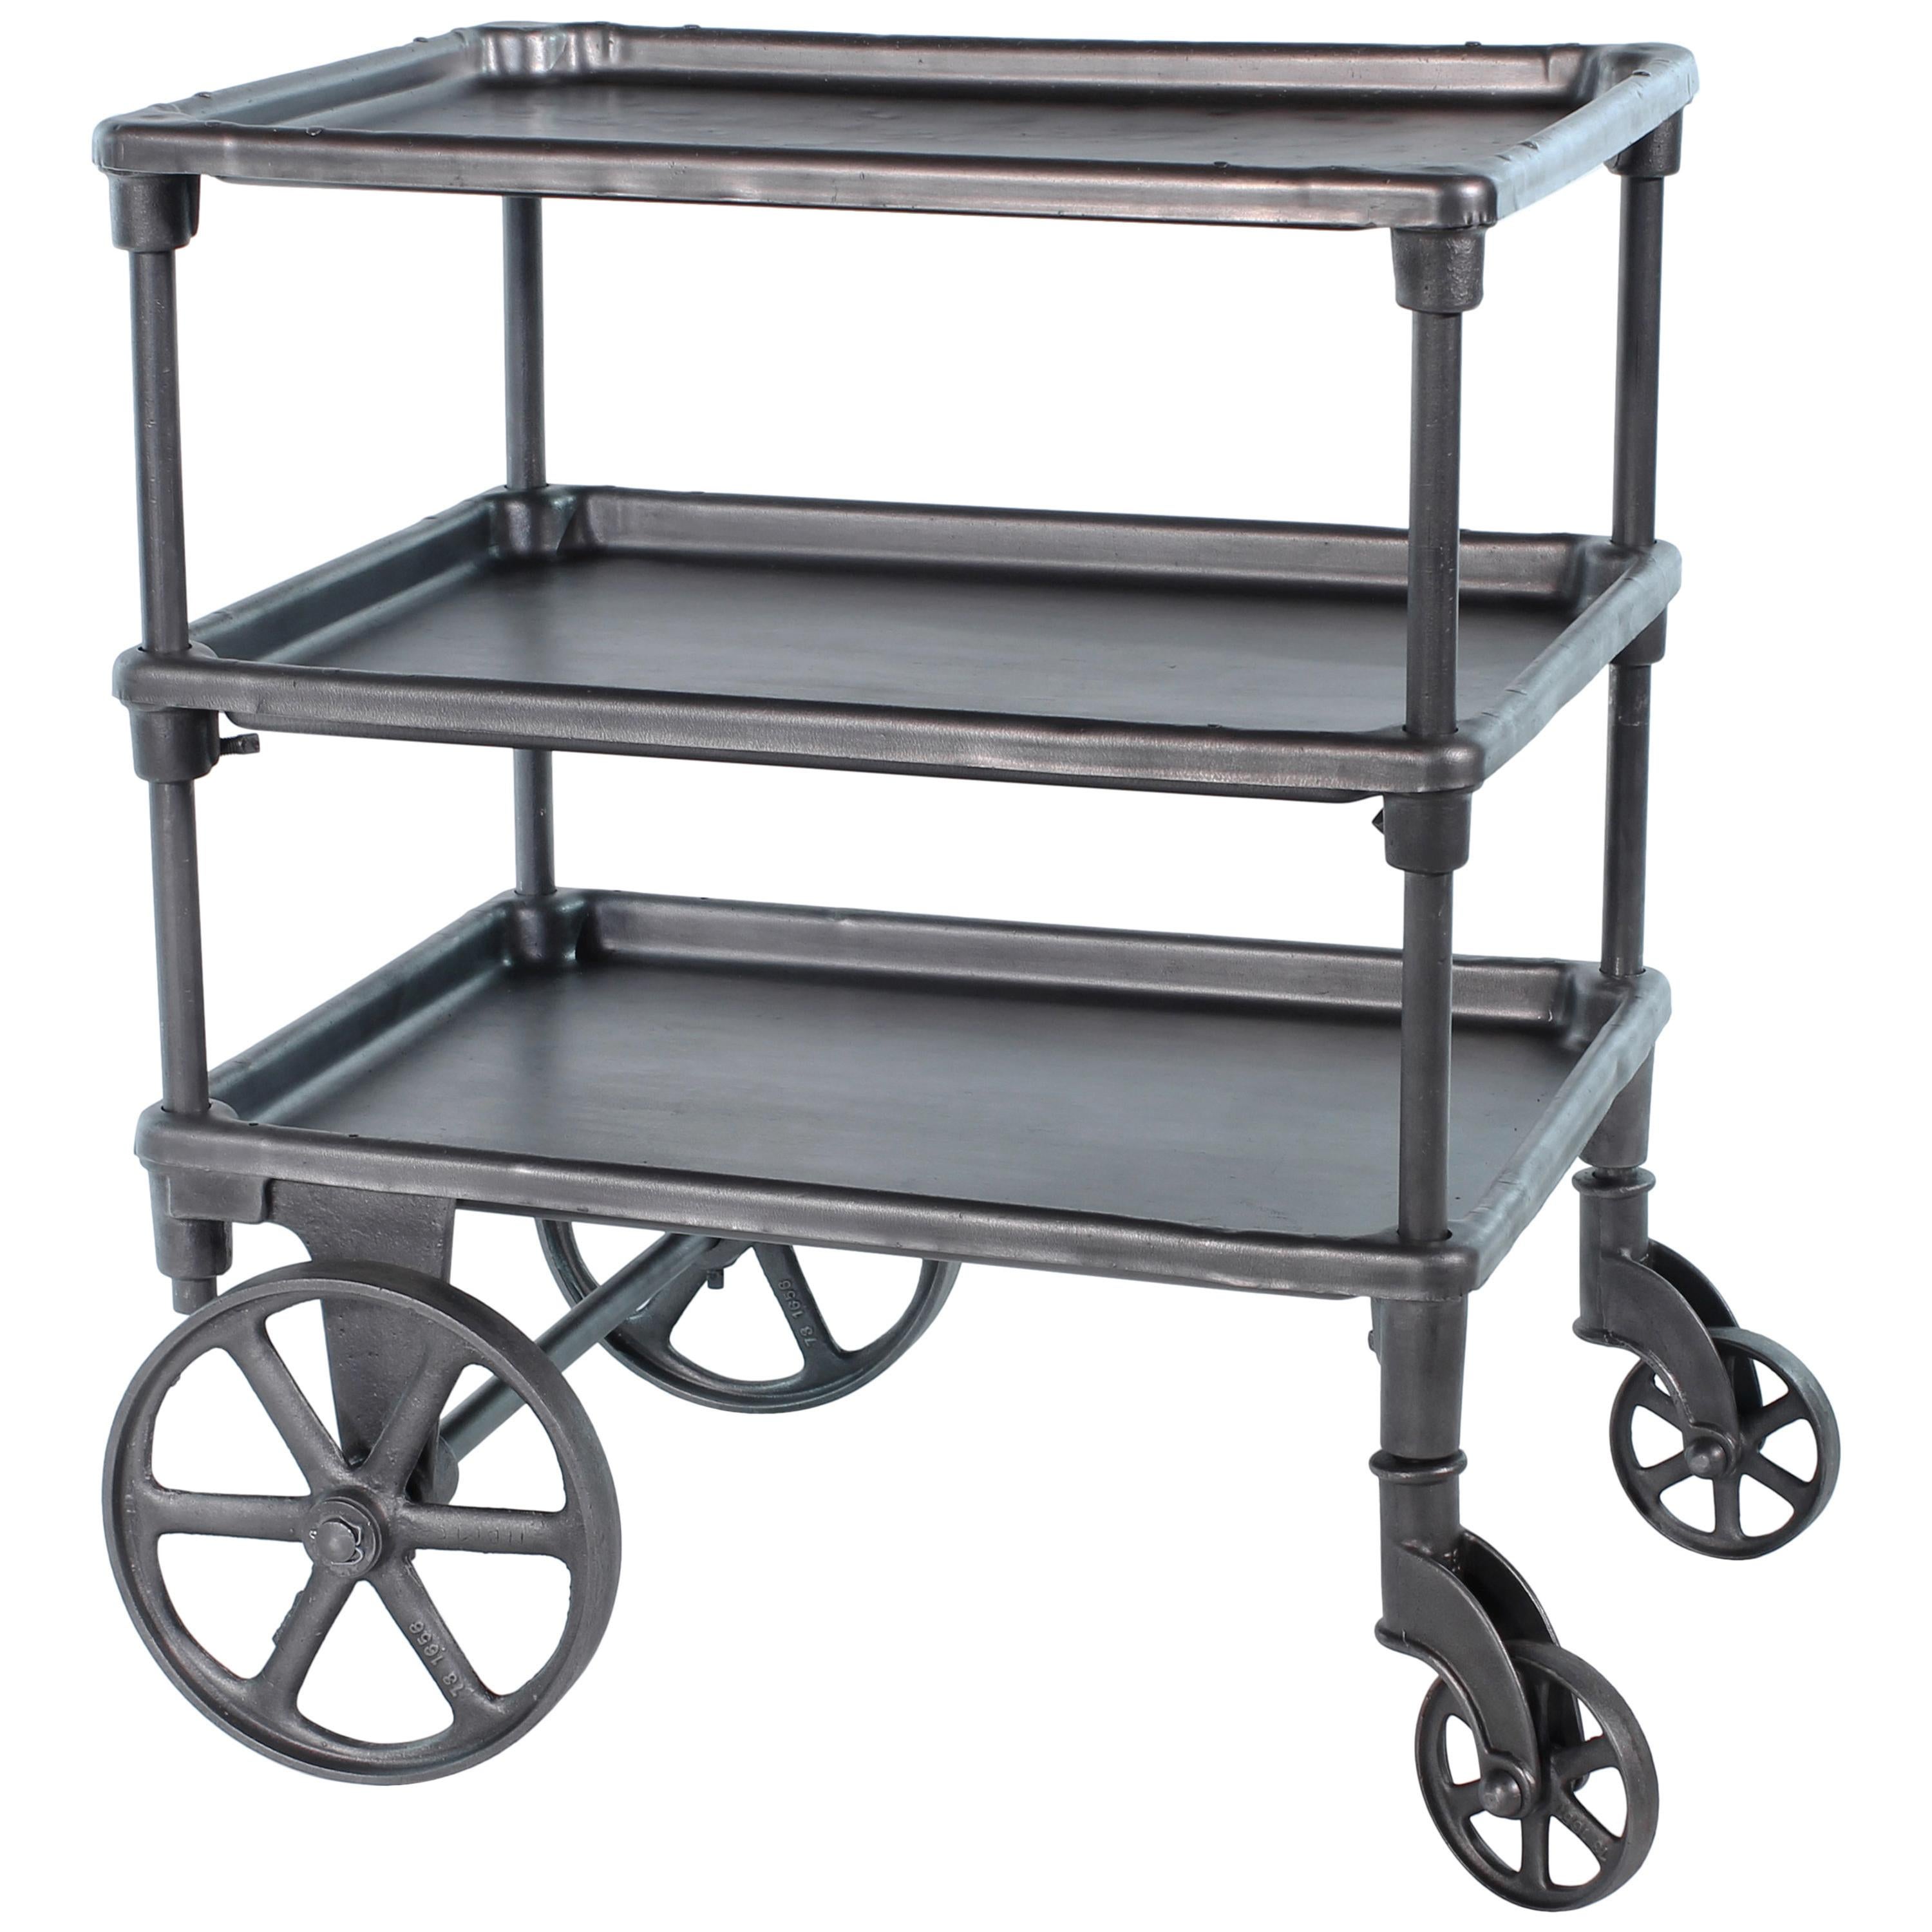 Vintage Industrial Three-Tier Table Rolling Bar Cart